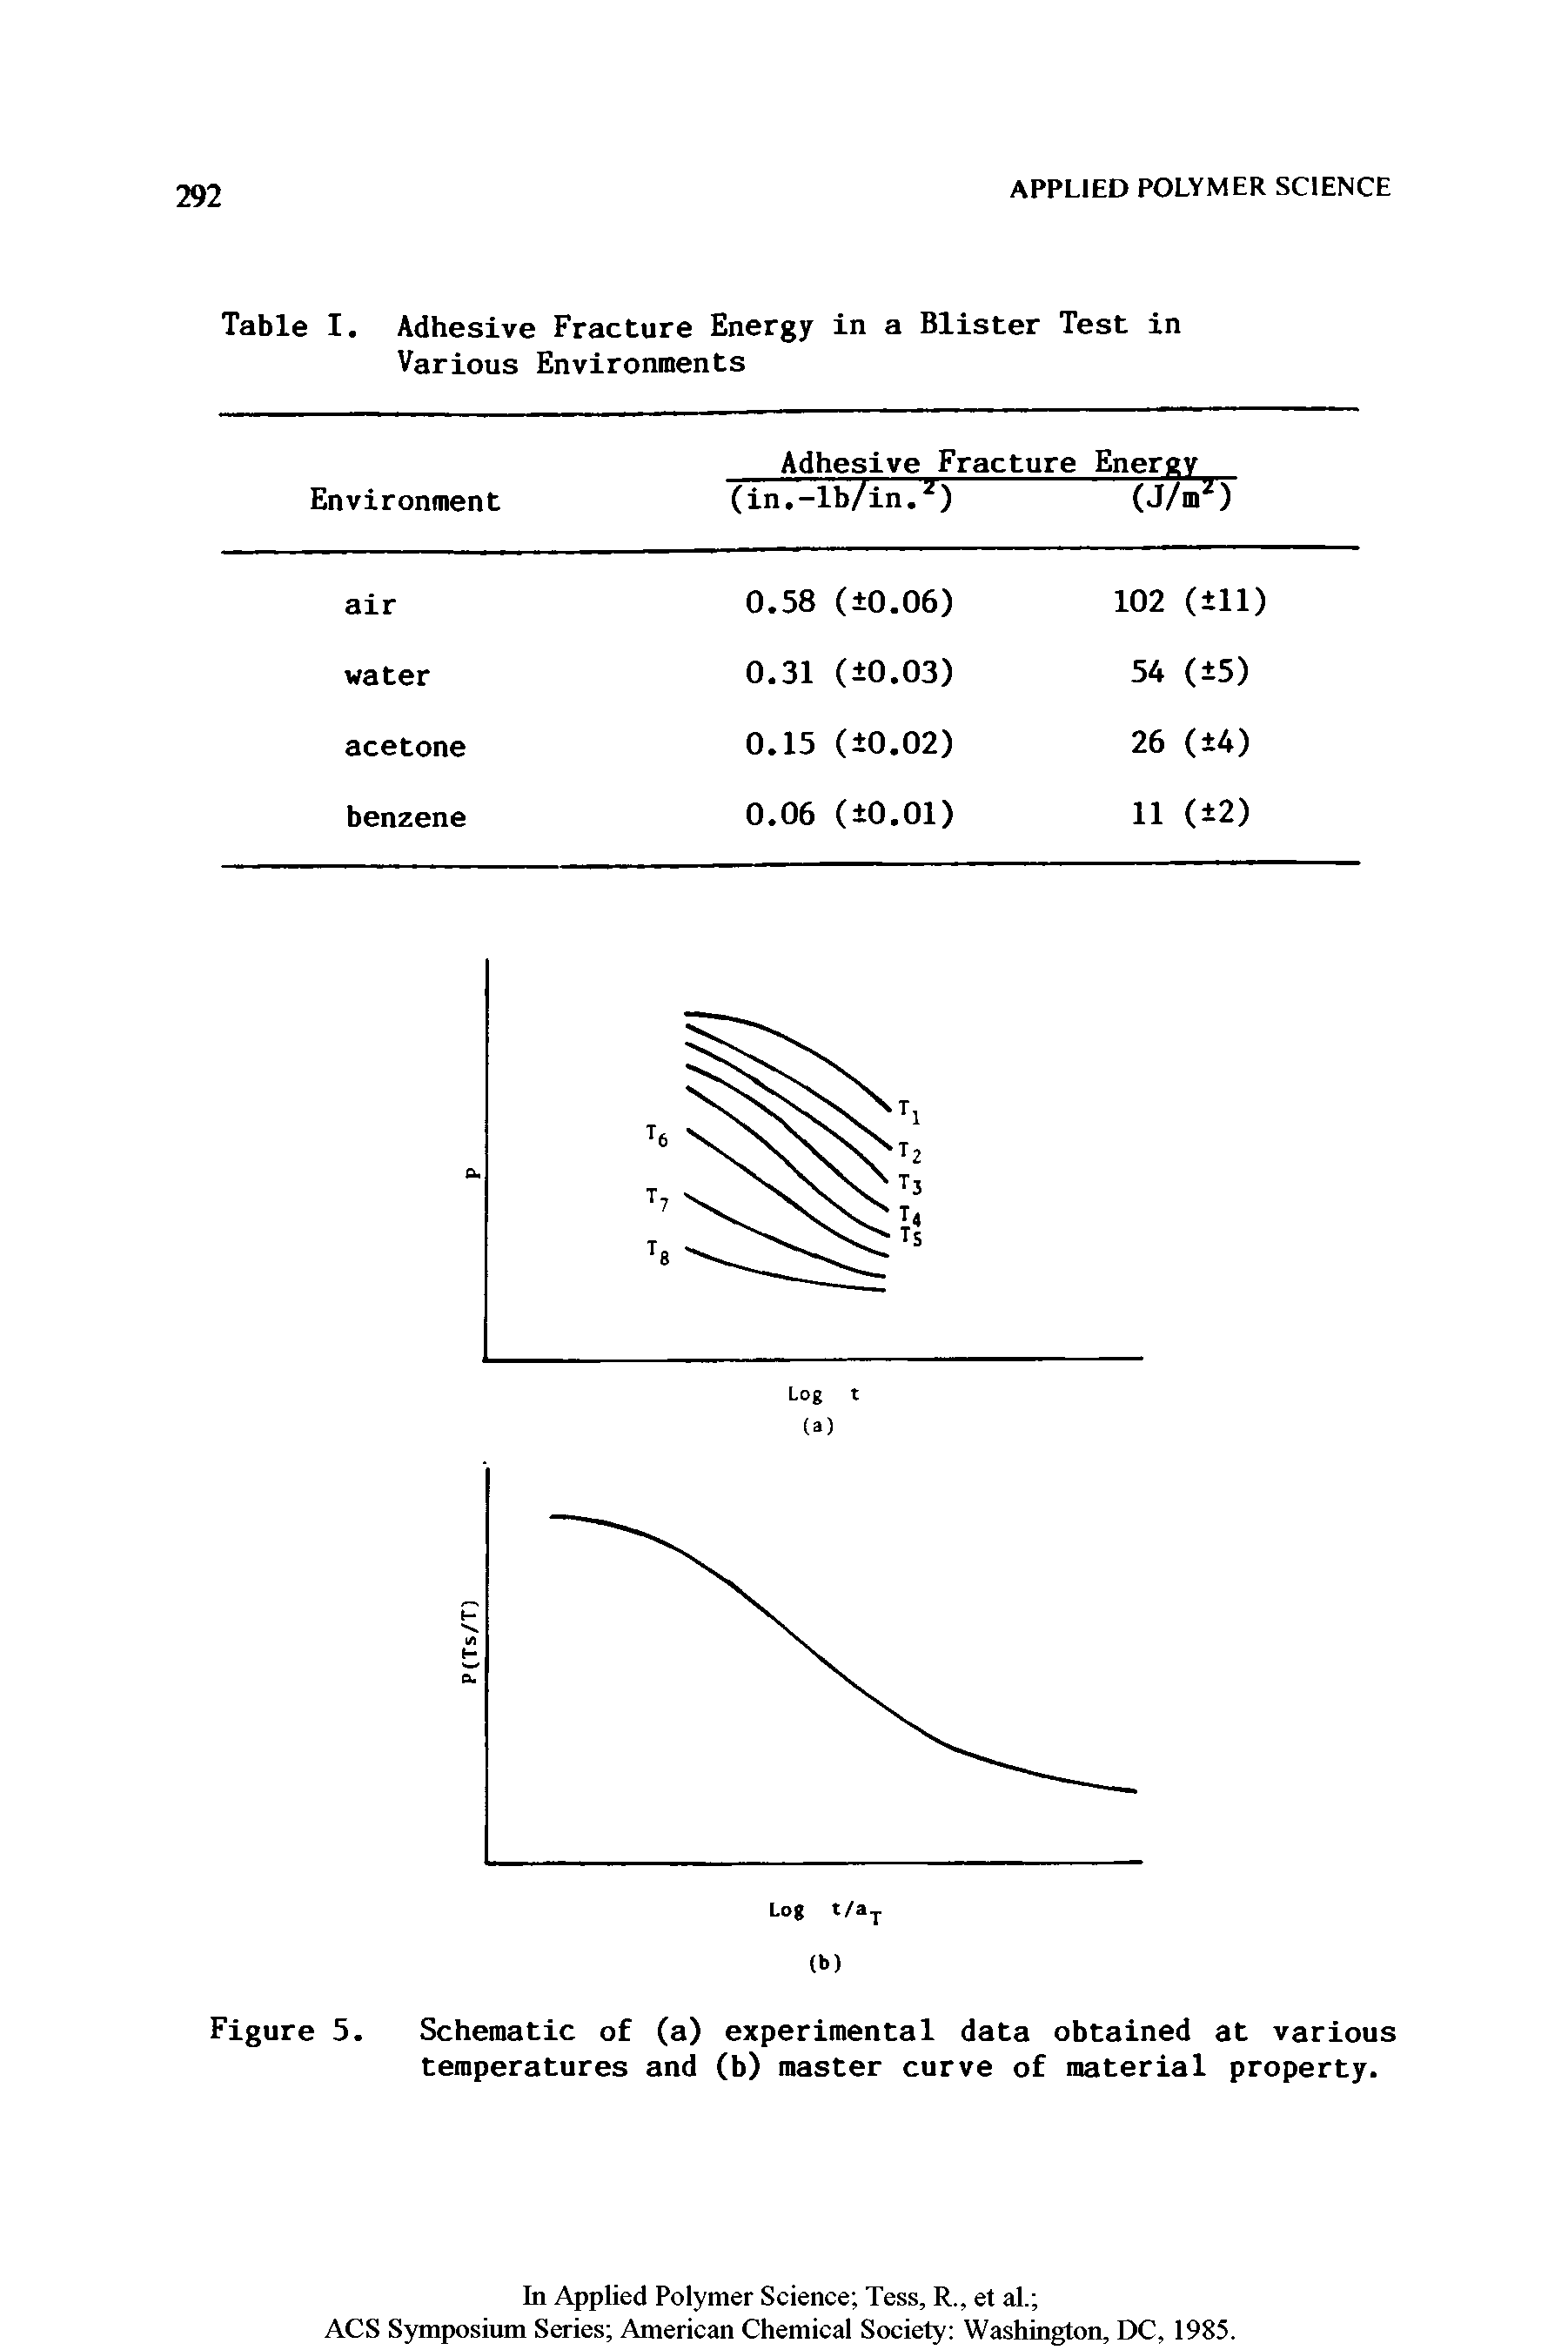 Table I. Adhesive Fracture Energy in a Blister Test in Various Environments...